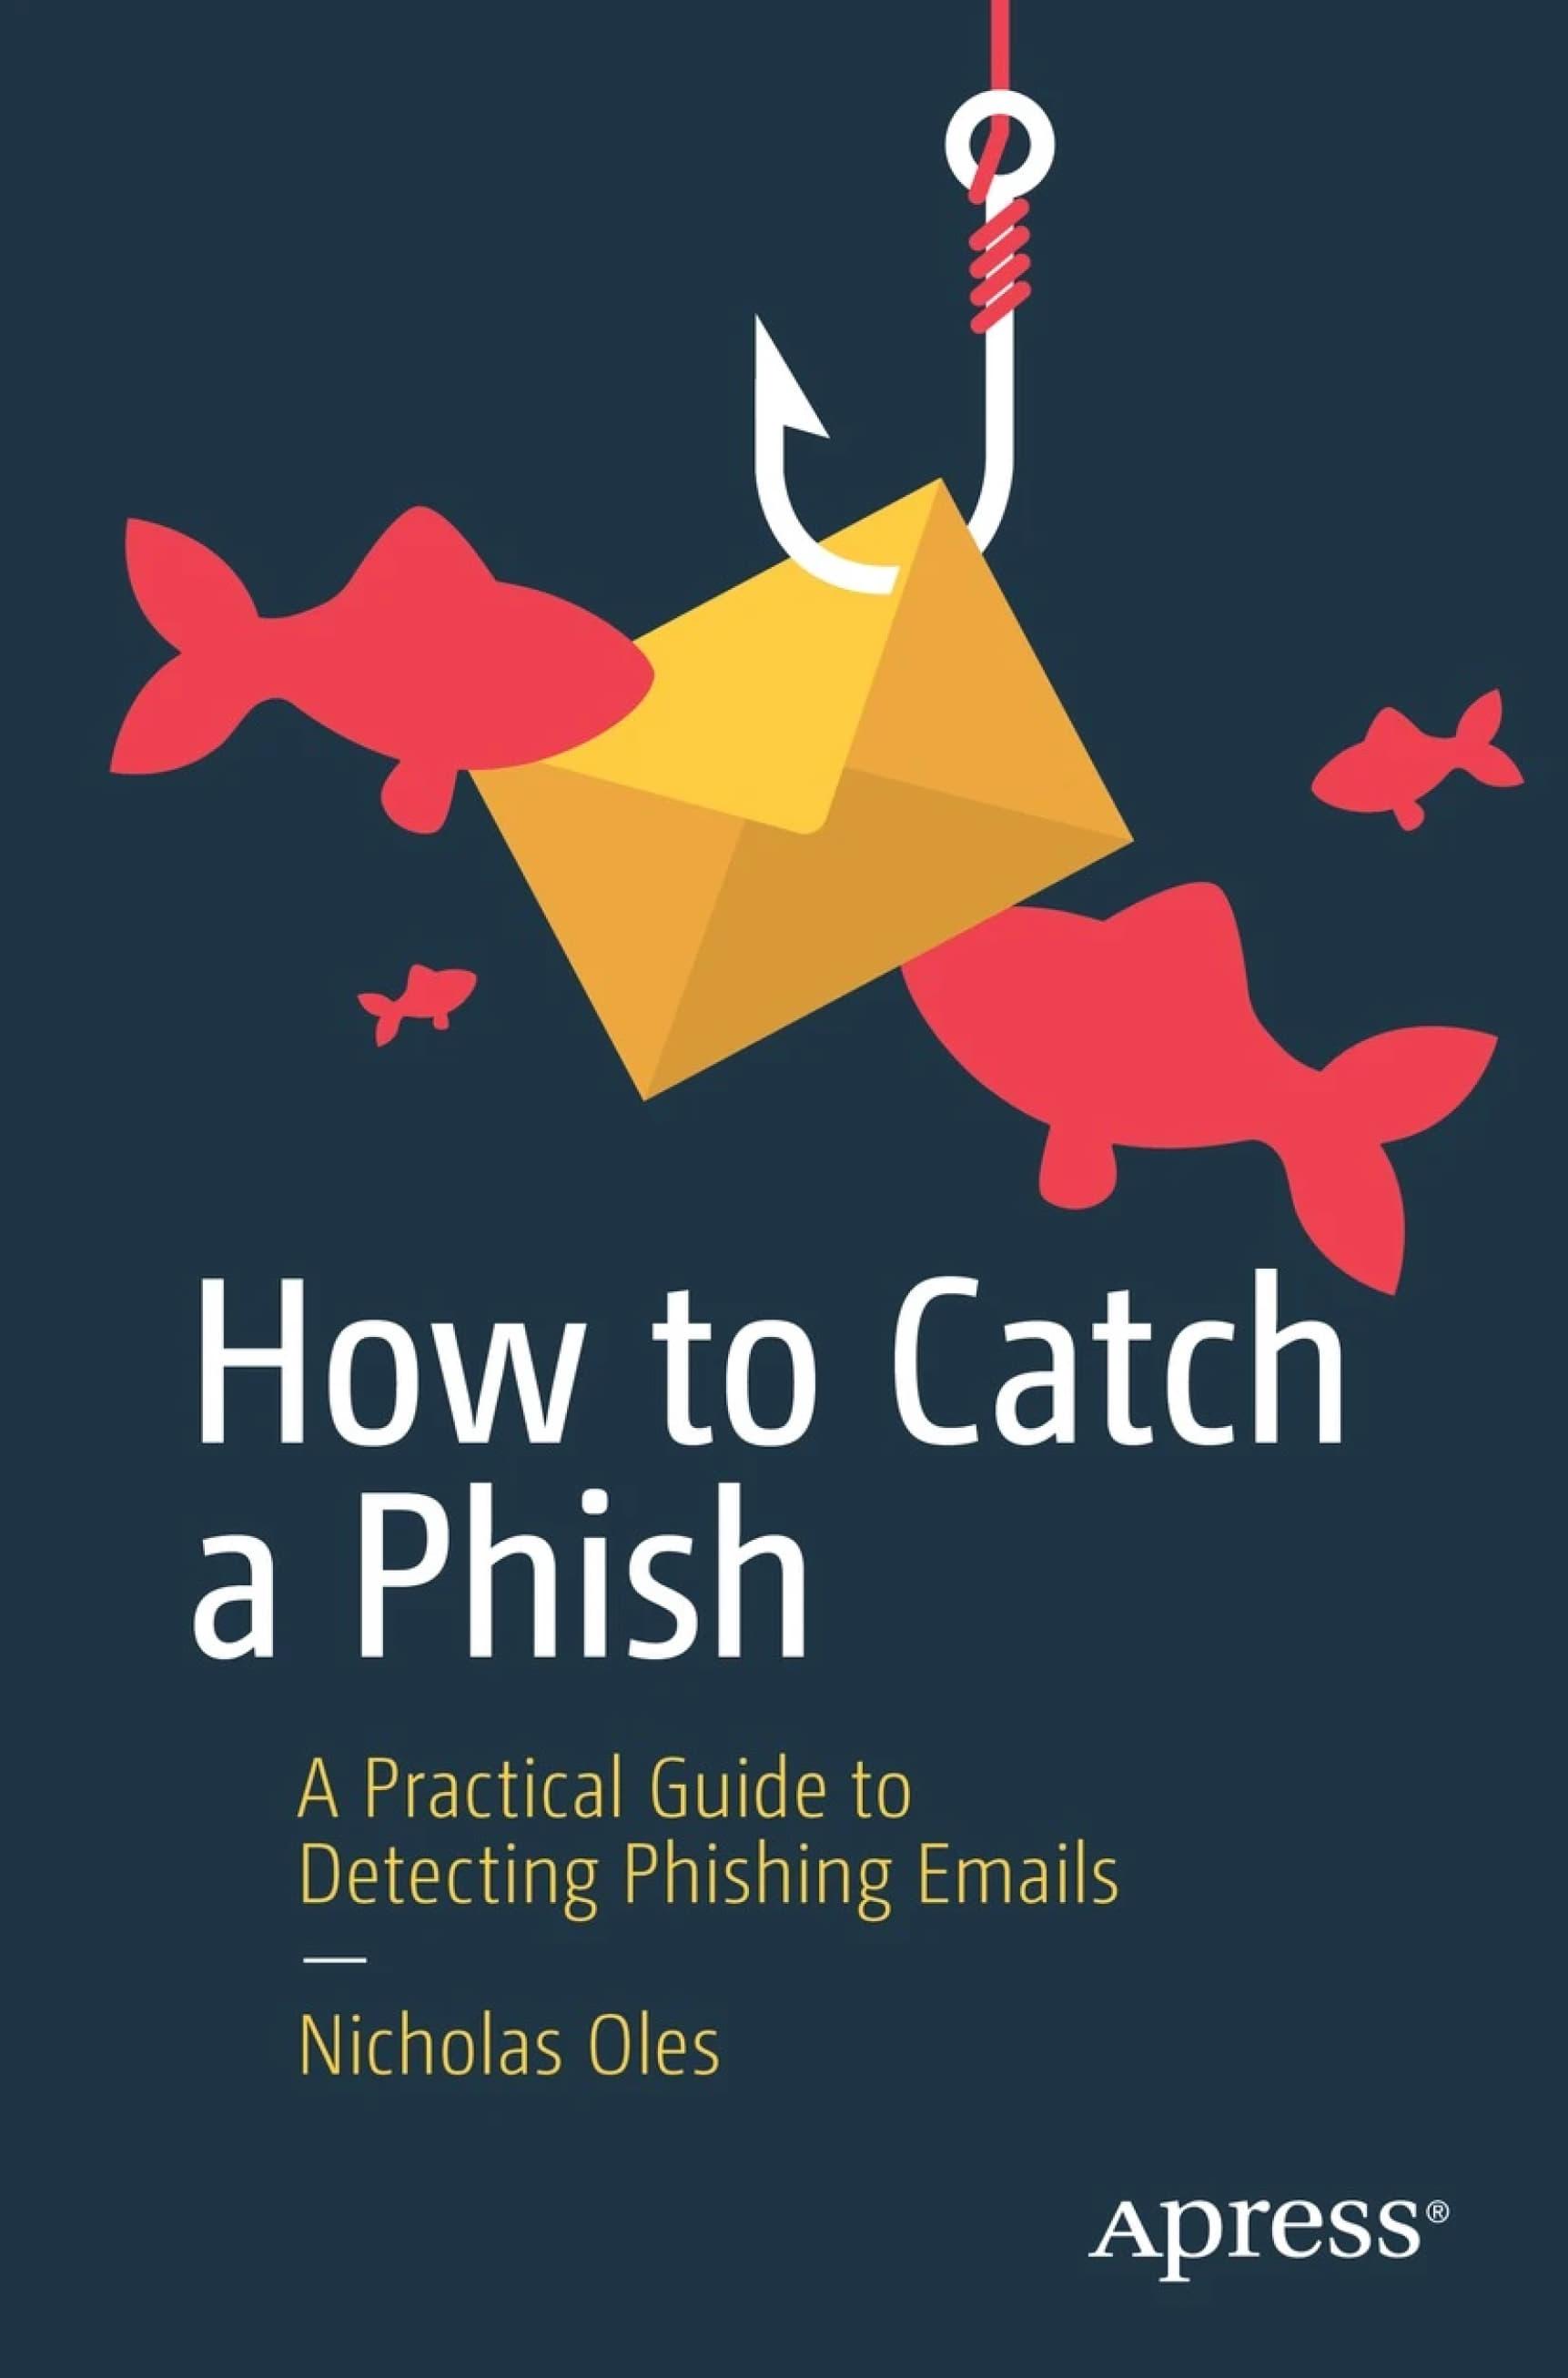 How to Catch a Phish: A Practical Guide to Detecting Phishing Emails by Nicholas Oles